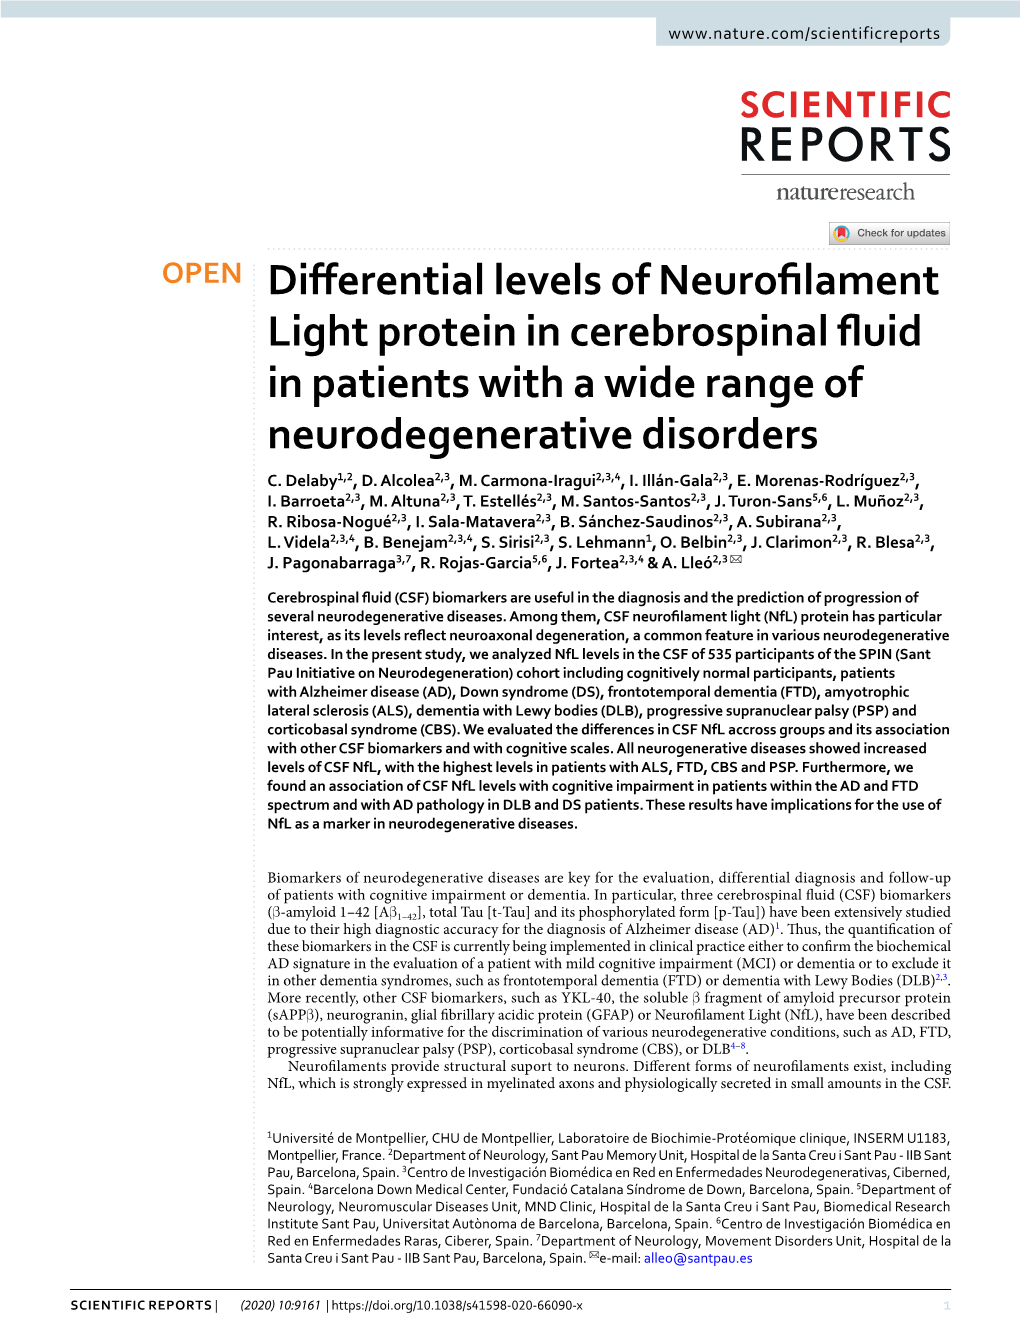 Differential Levels of Neurofilament Light Protein in Cerebrospinal Fluid